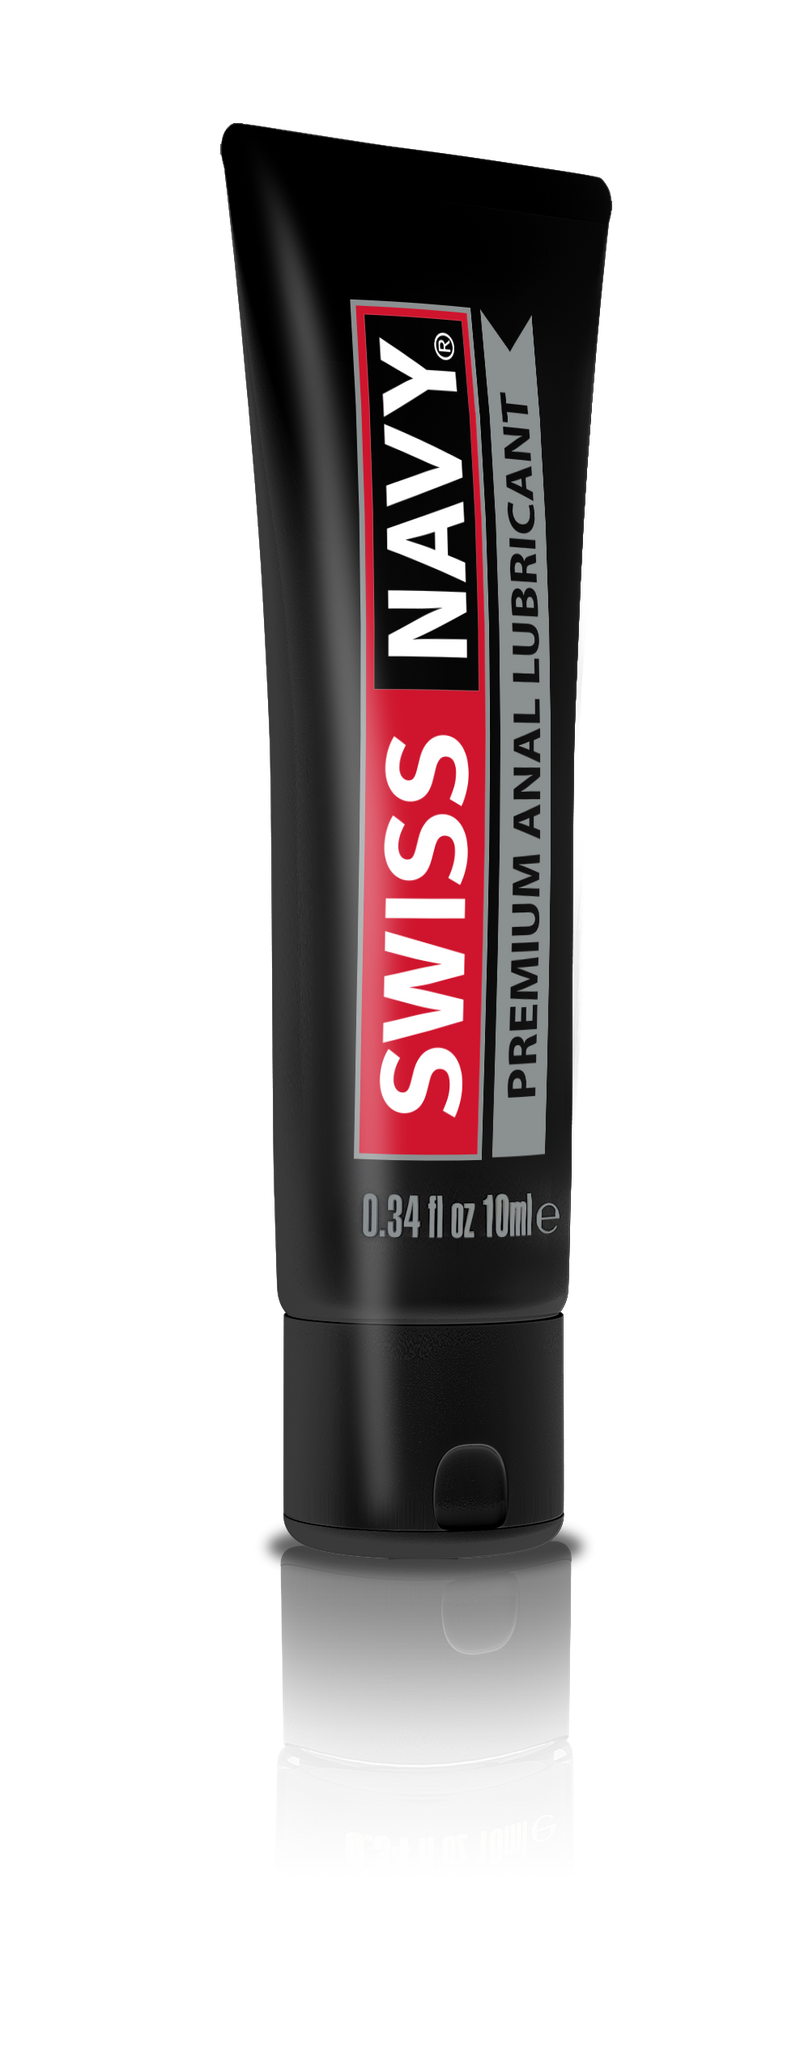 MD Science Swiss Navy Anal Lubricant 10ml at $3.99